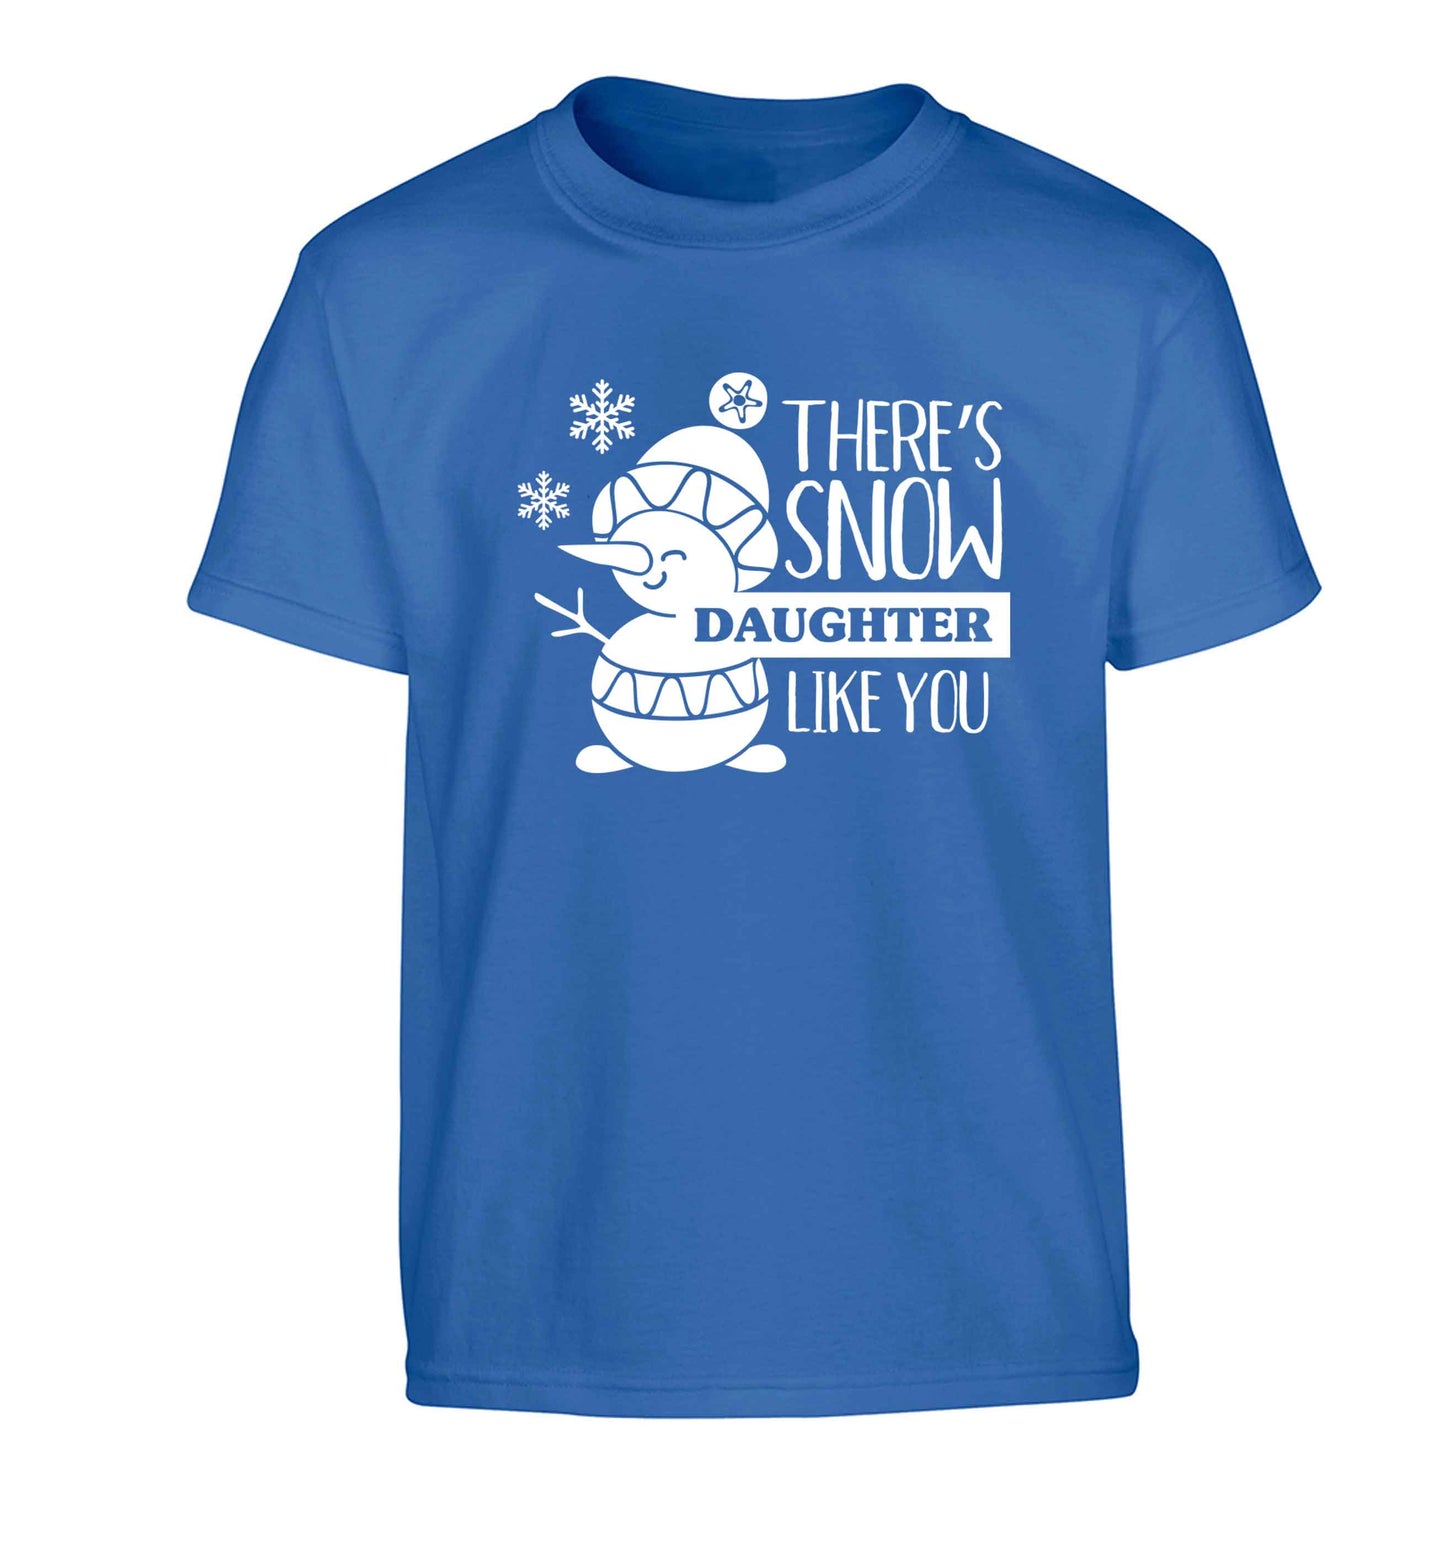 There's snow daughter like you Children's blue Tshirt 12-13 Years